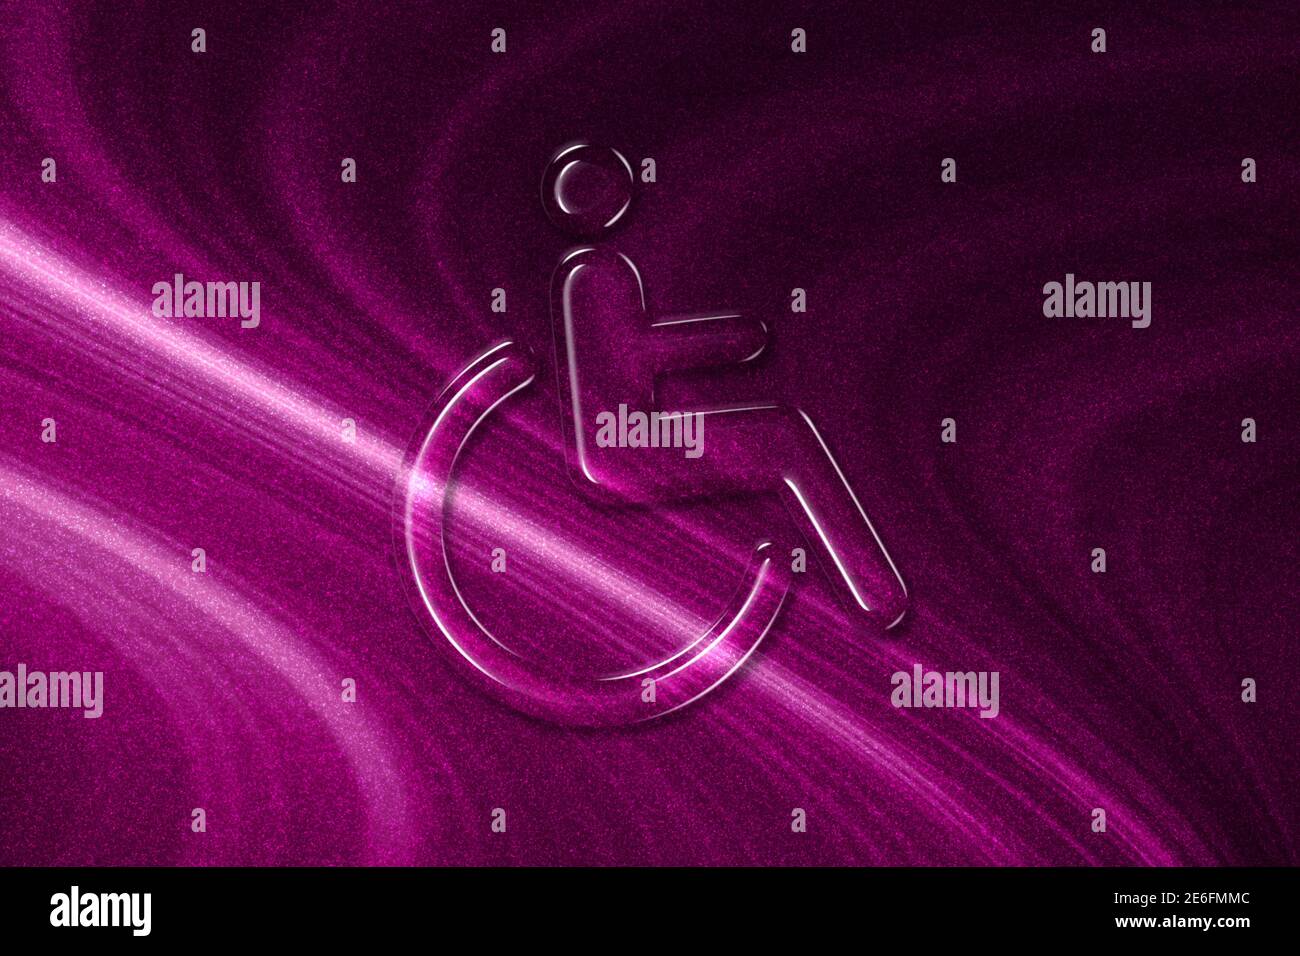 Wheelchair sign, Disabled symbol, Disabled Handicap, magenta background Stock Photo